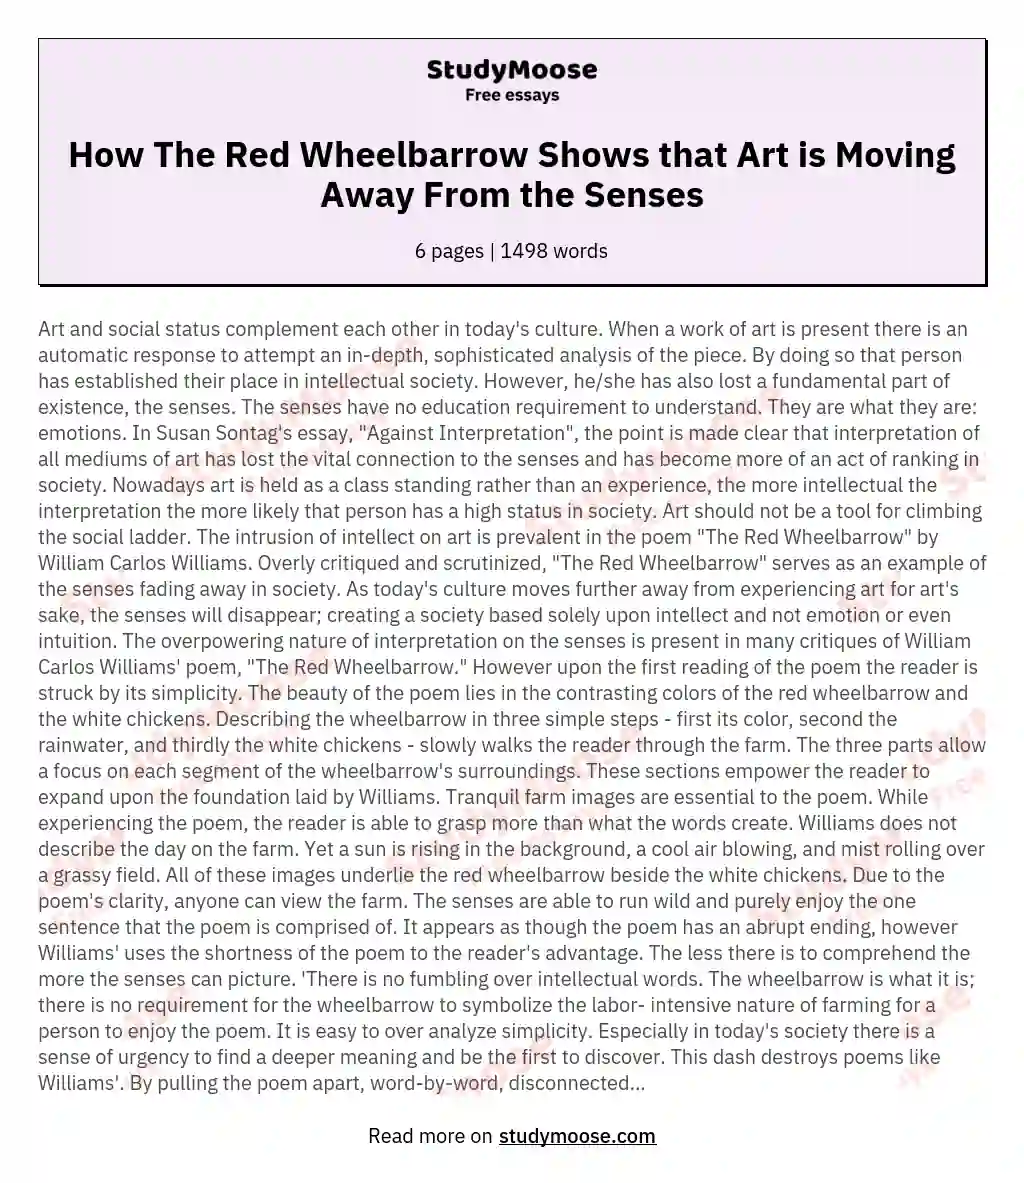 How The Red Wheelbarrow Shows that Art is Moving Away From the Senses essay